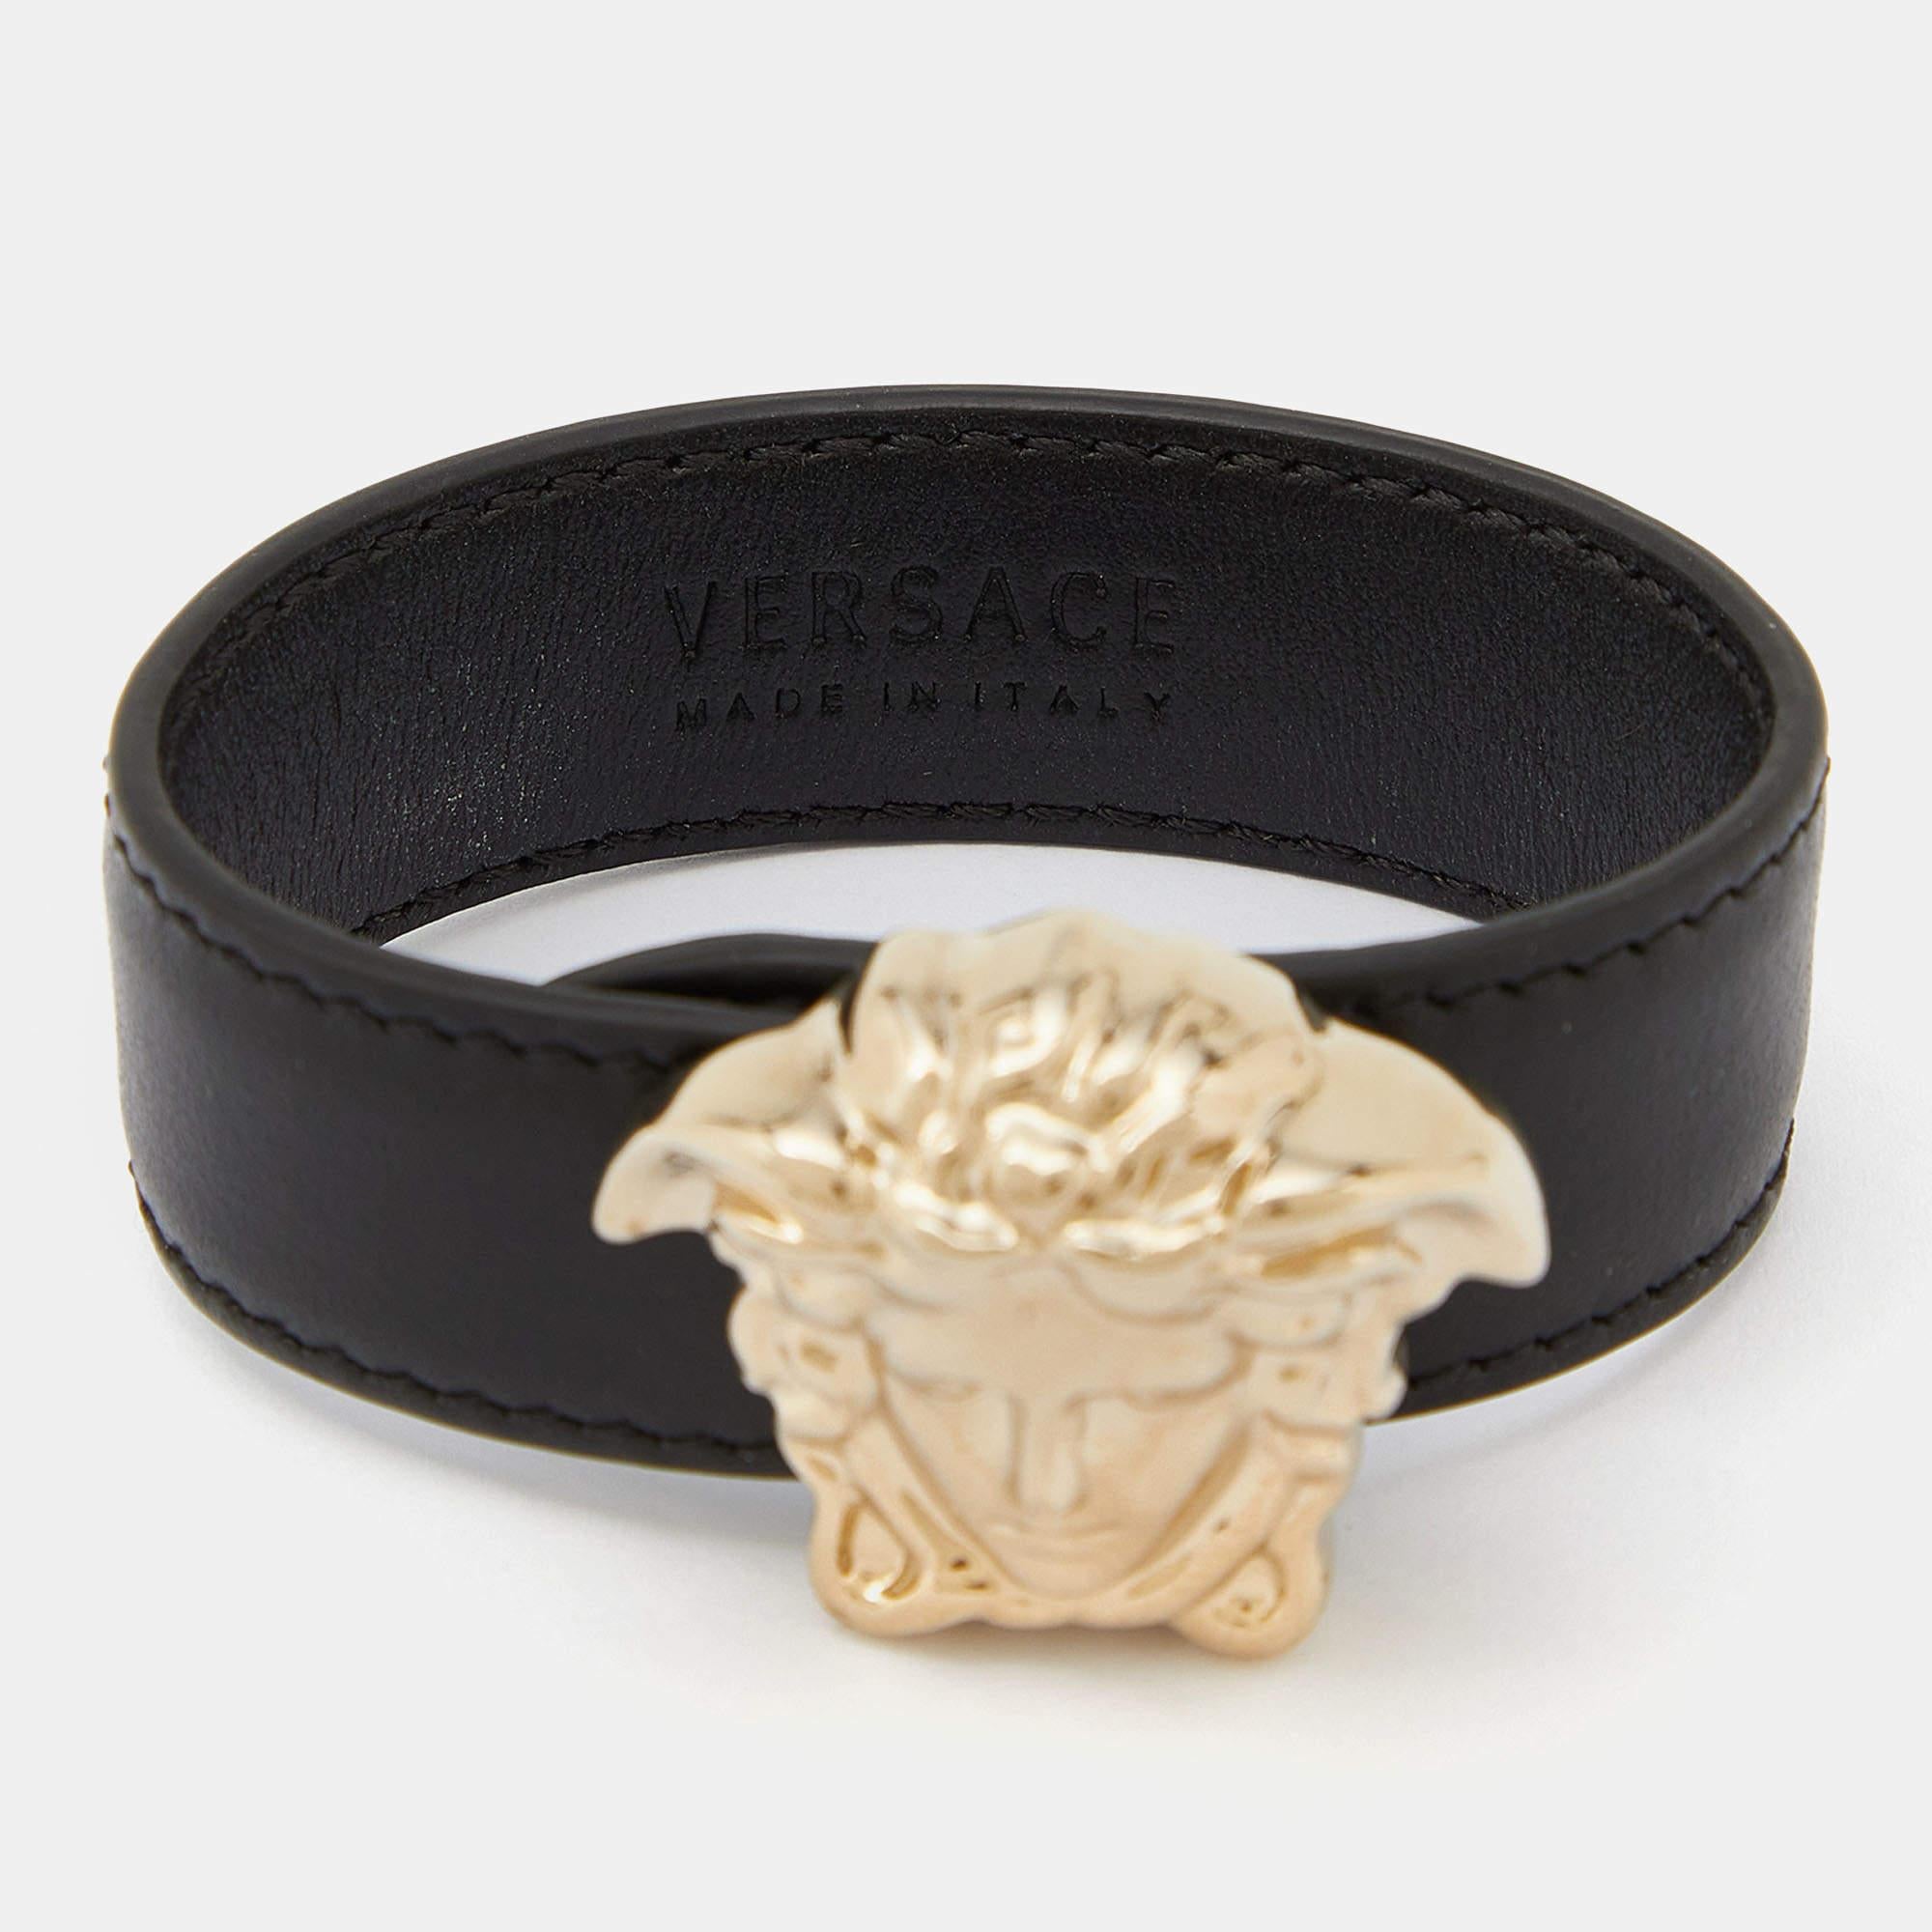 Ultra-modern and chic in design, this Versace bracelet exhibits contemporary fashion. The luxe design is set with distinct elements to give the creation a classy touch. This sweet piece will look great when paired with other bracelets and even